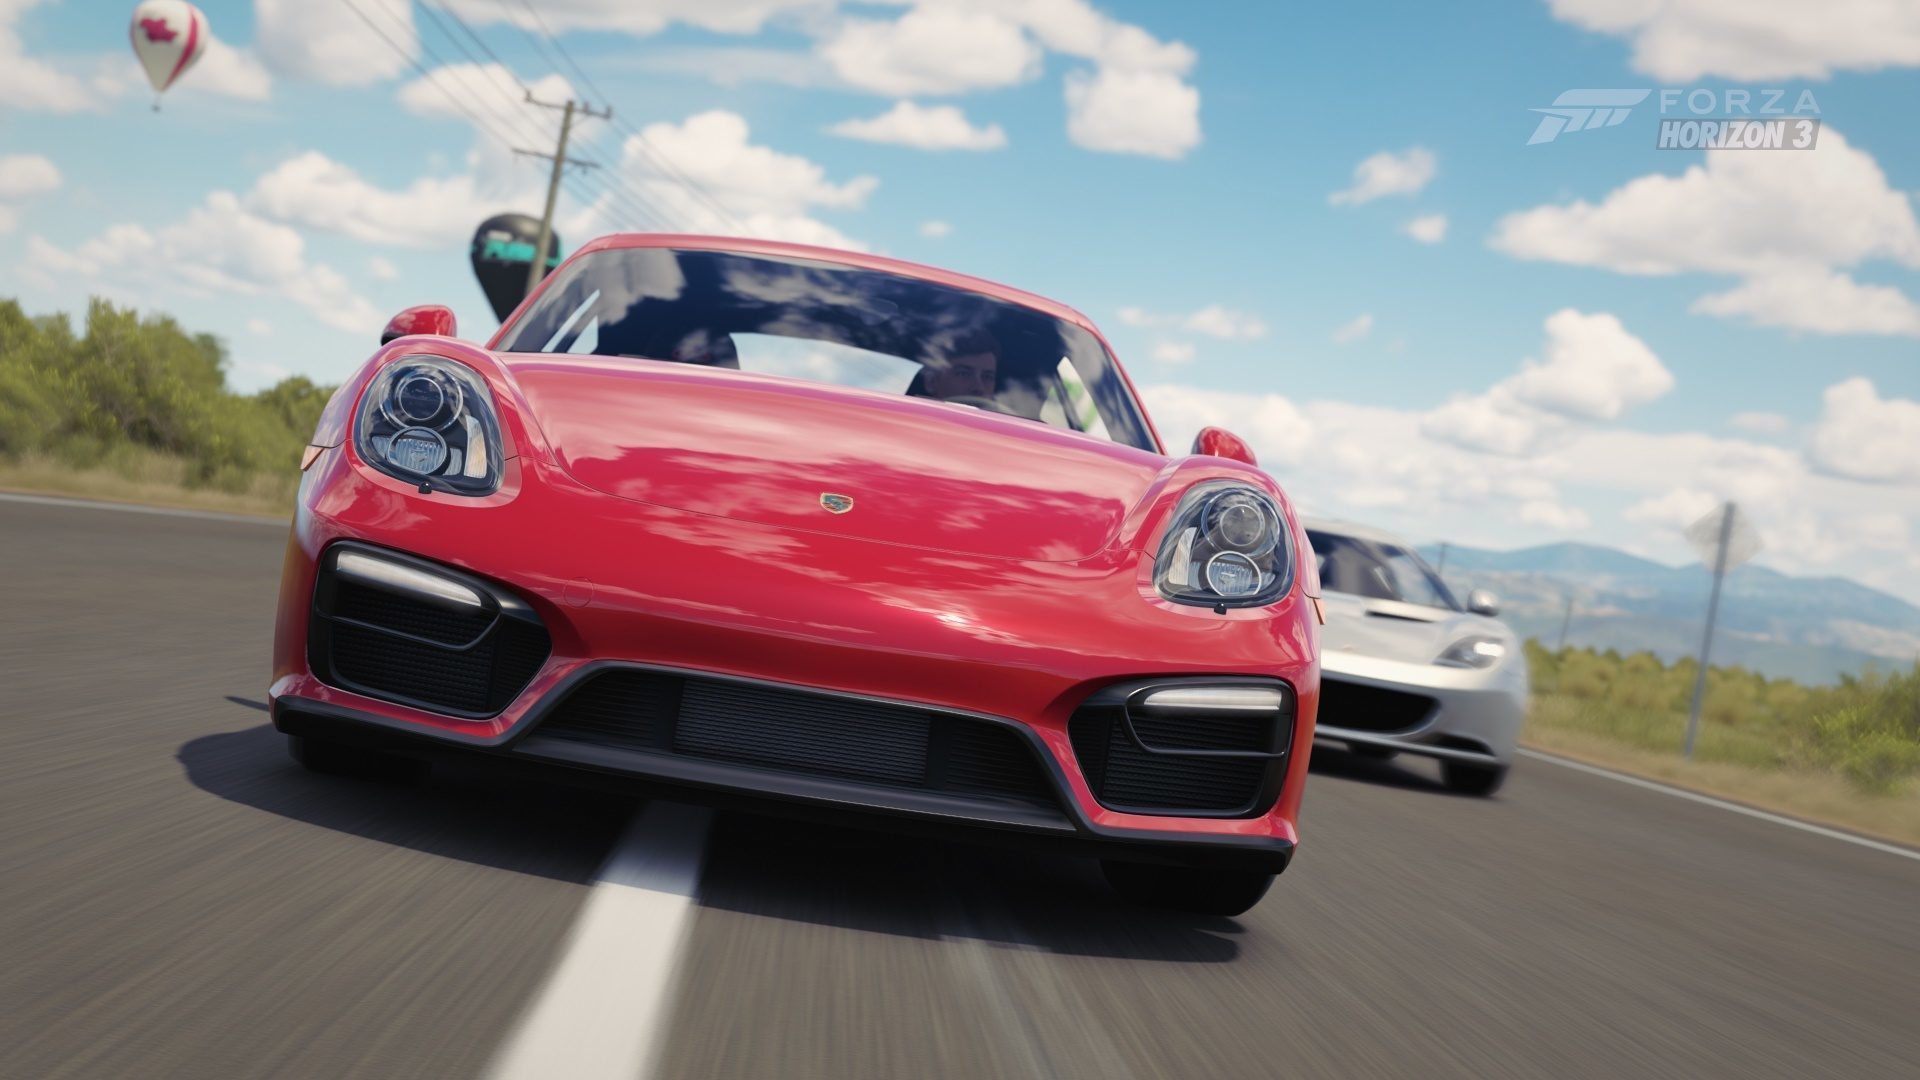 Secure the Porsche Cayman GTS in This Weekend's Forzathon